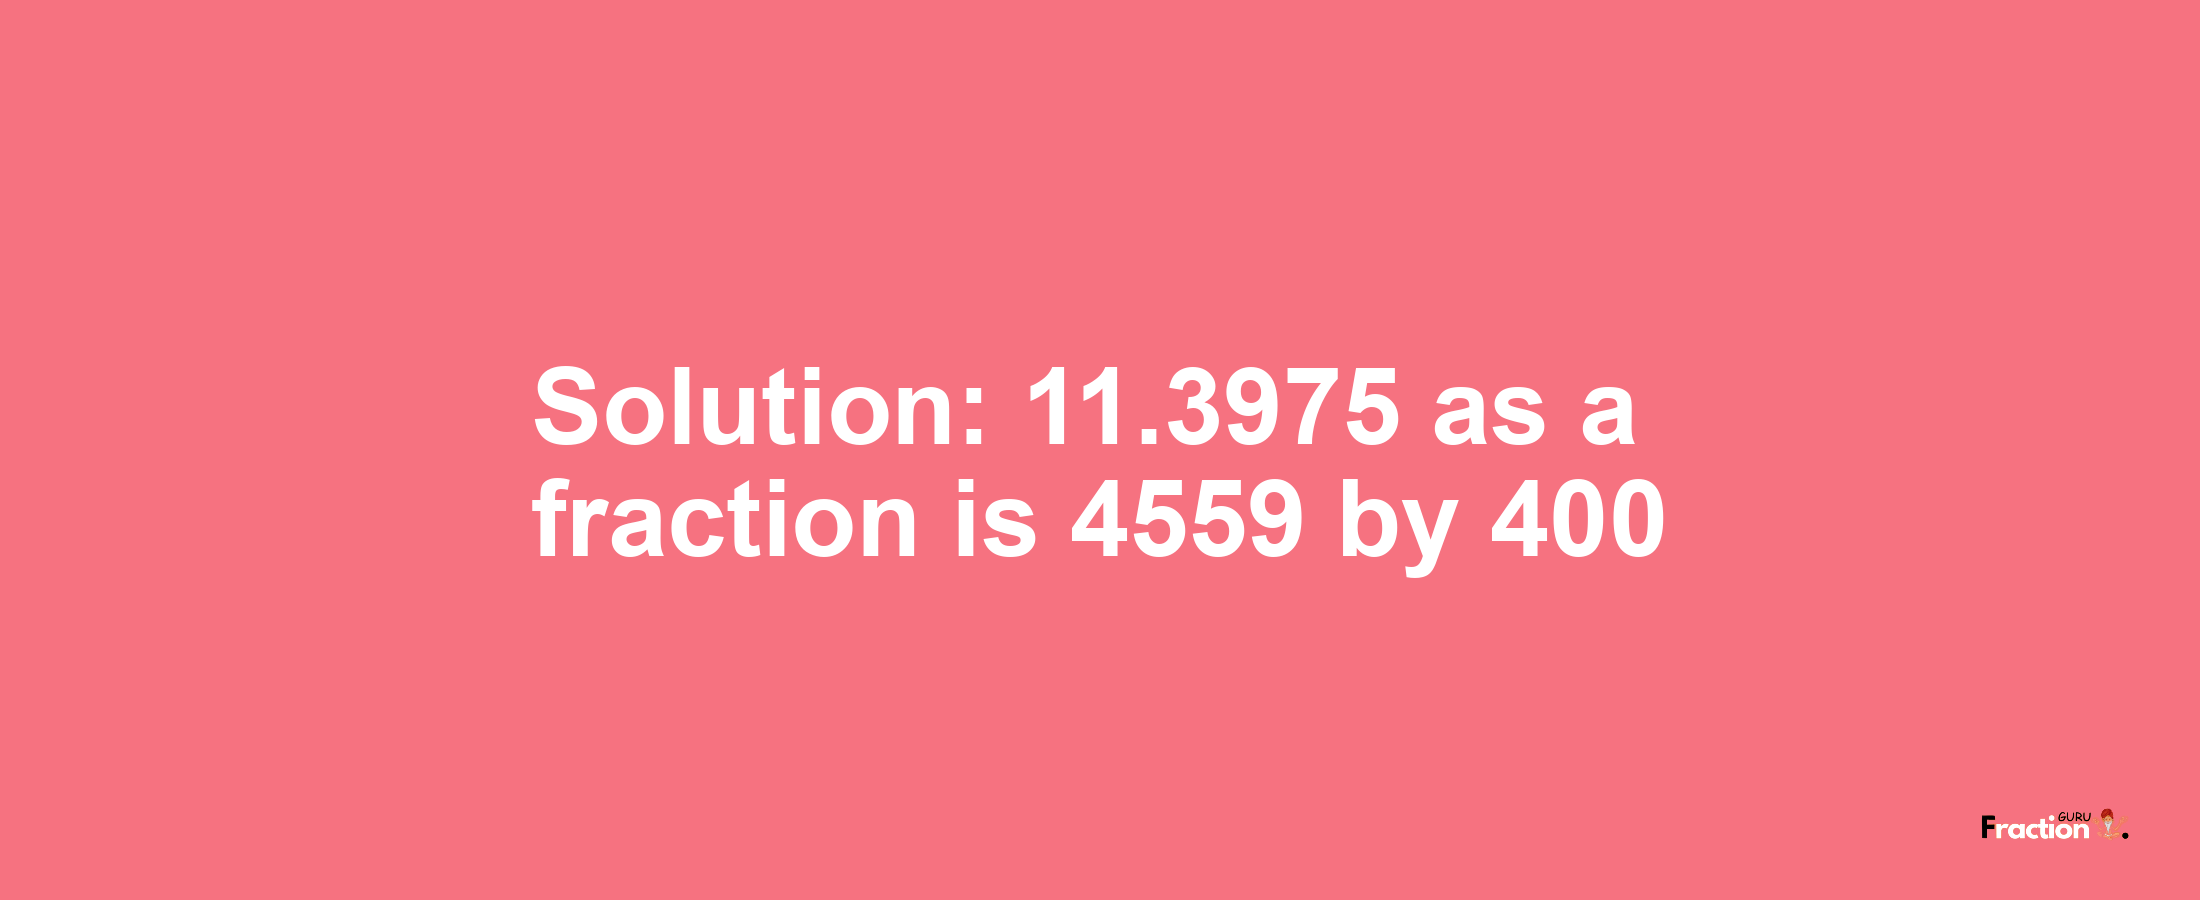 Solution:11.3975 as a fraction is 4559/400